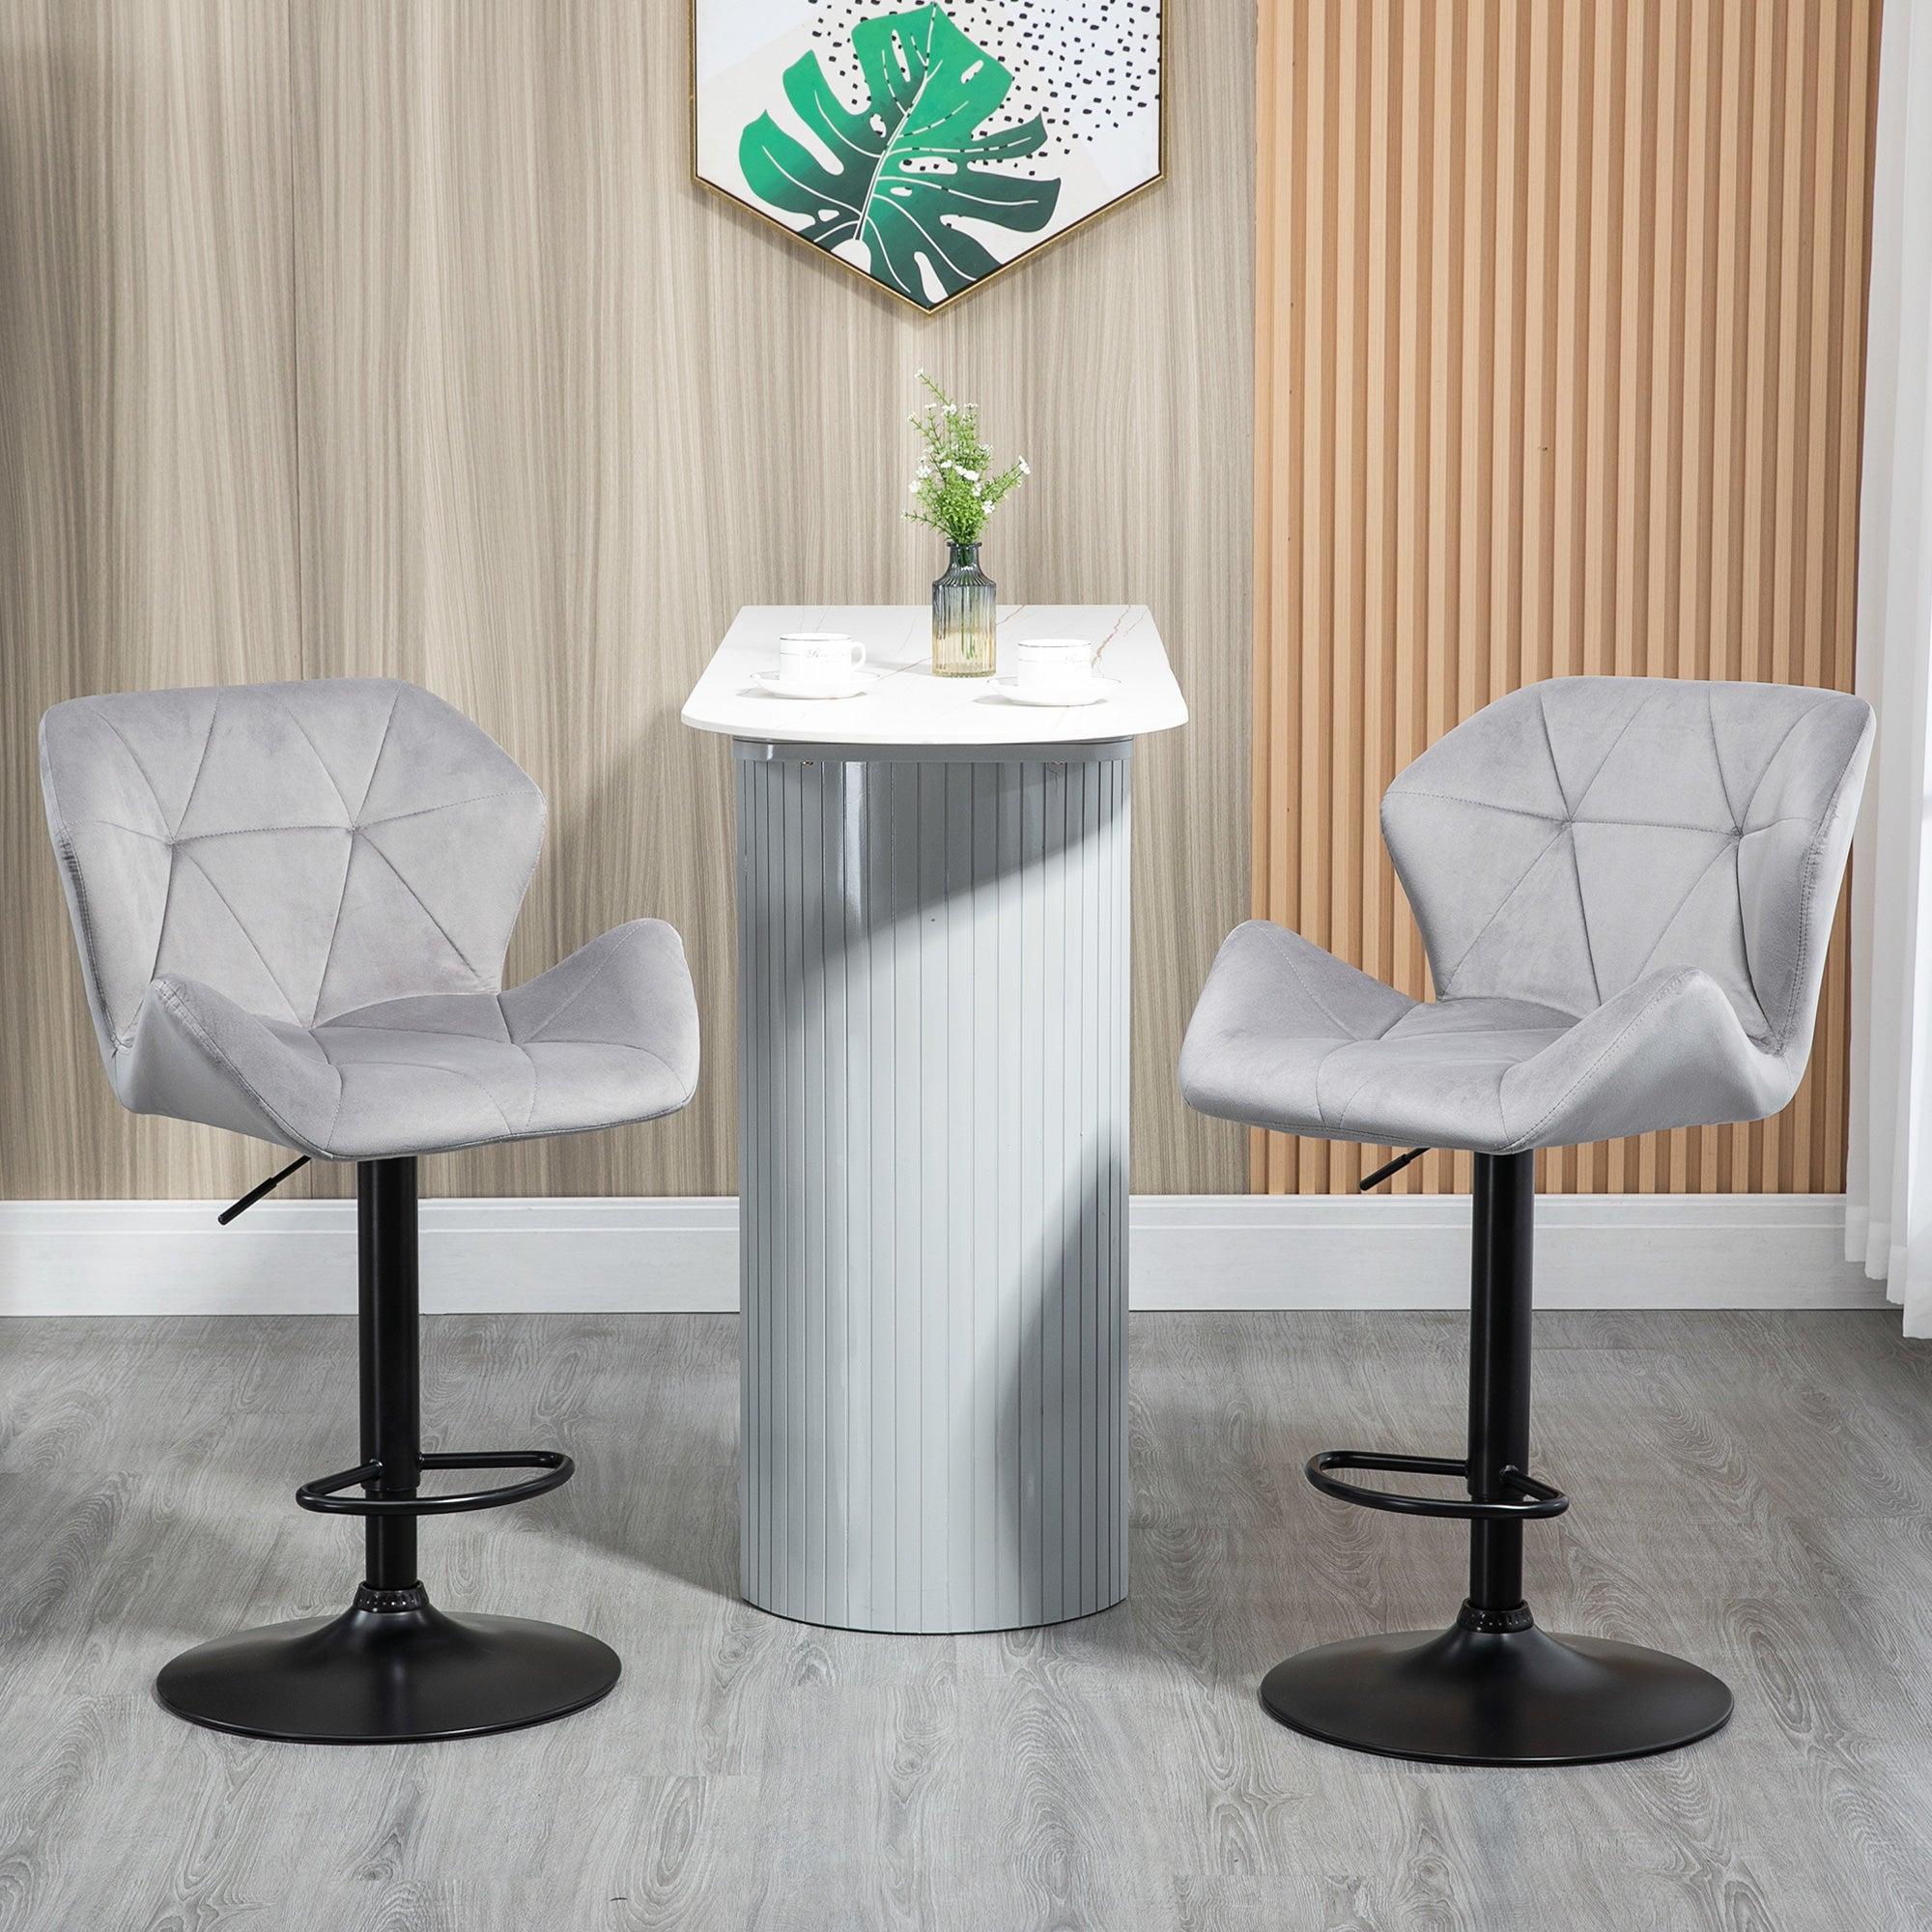 Set Of 2 Bar stools With Backs , Velvet-Touch Barstools w/ Metal Frame Footrest Triangle Indenting Moulded Seat Adjustable Height Swivel Grey  AOSOM   